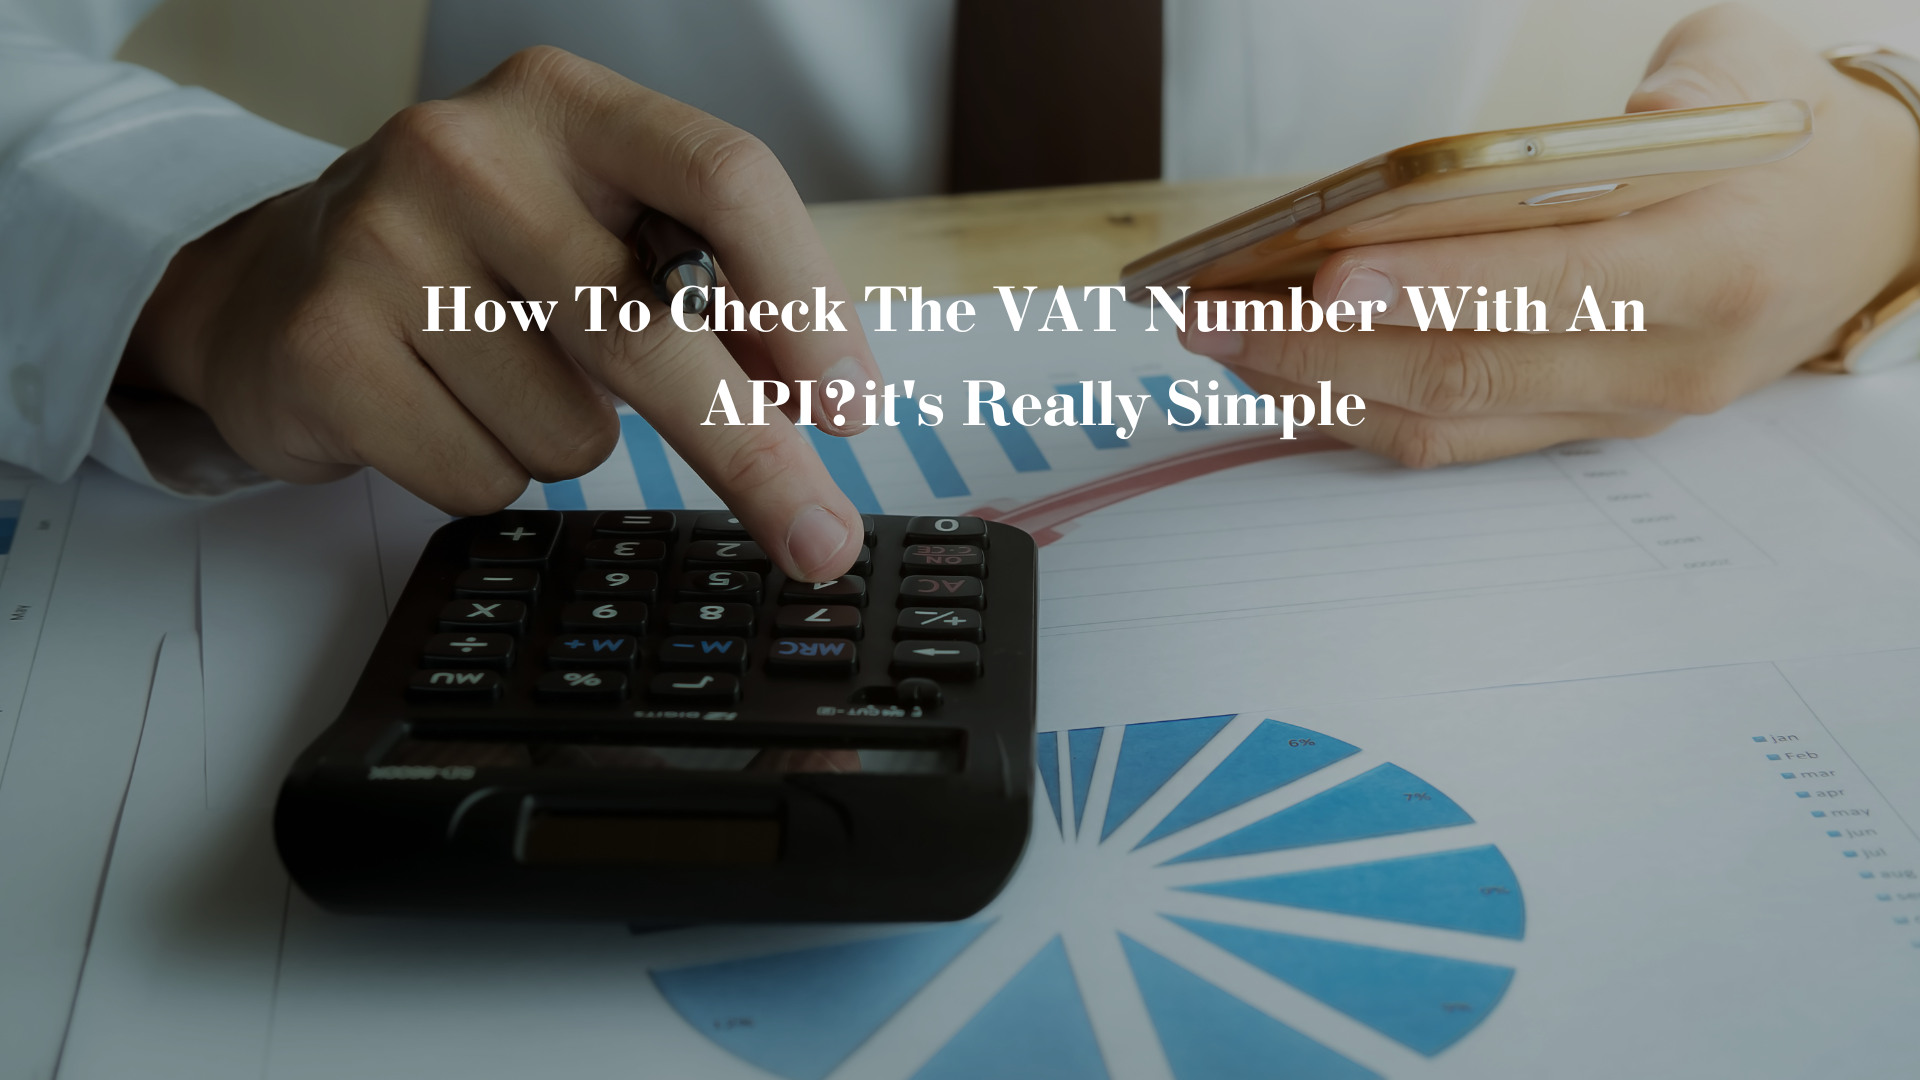 How To Check The VAT Number With An API?it’s Really Simple